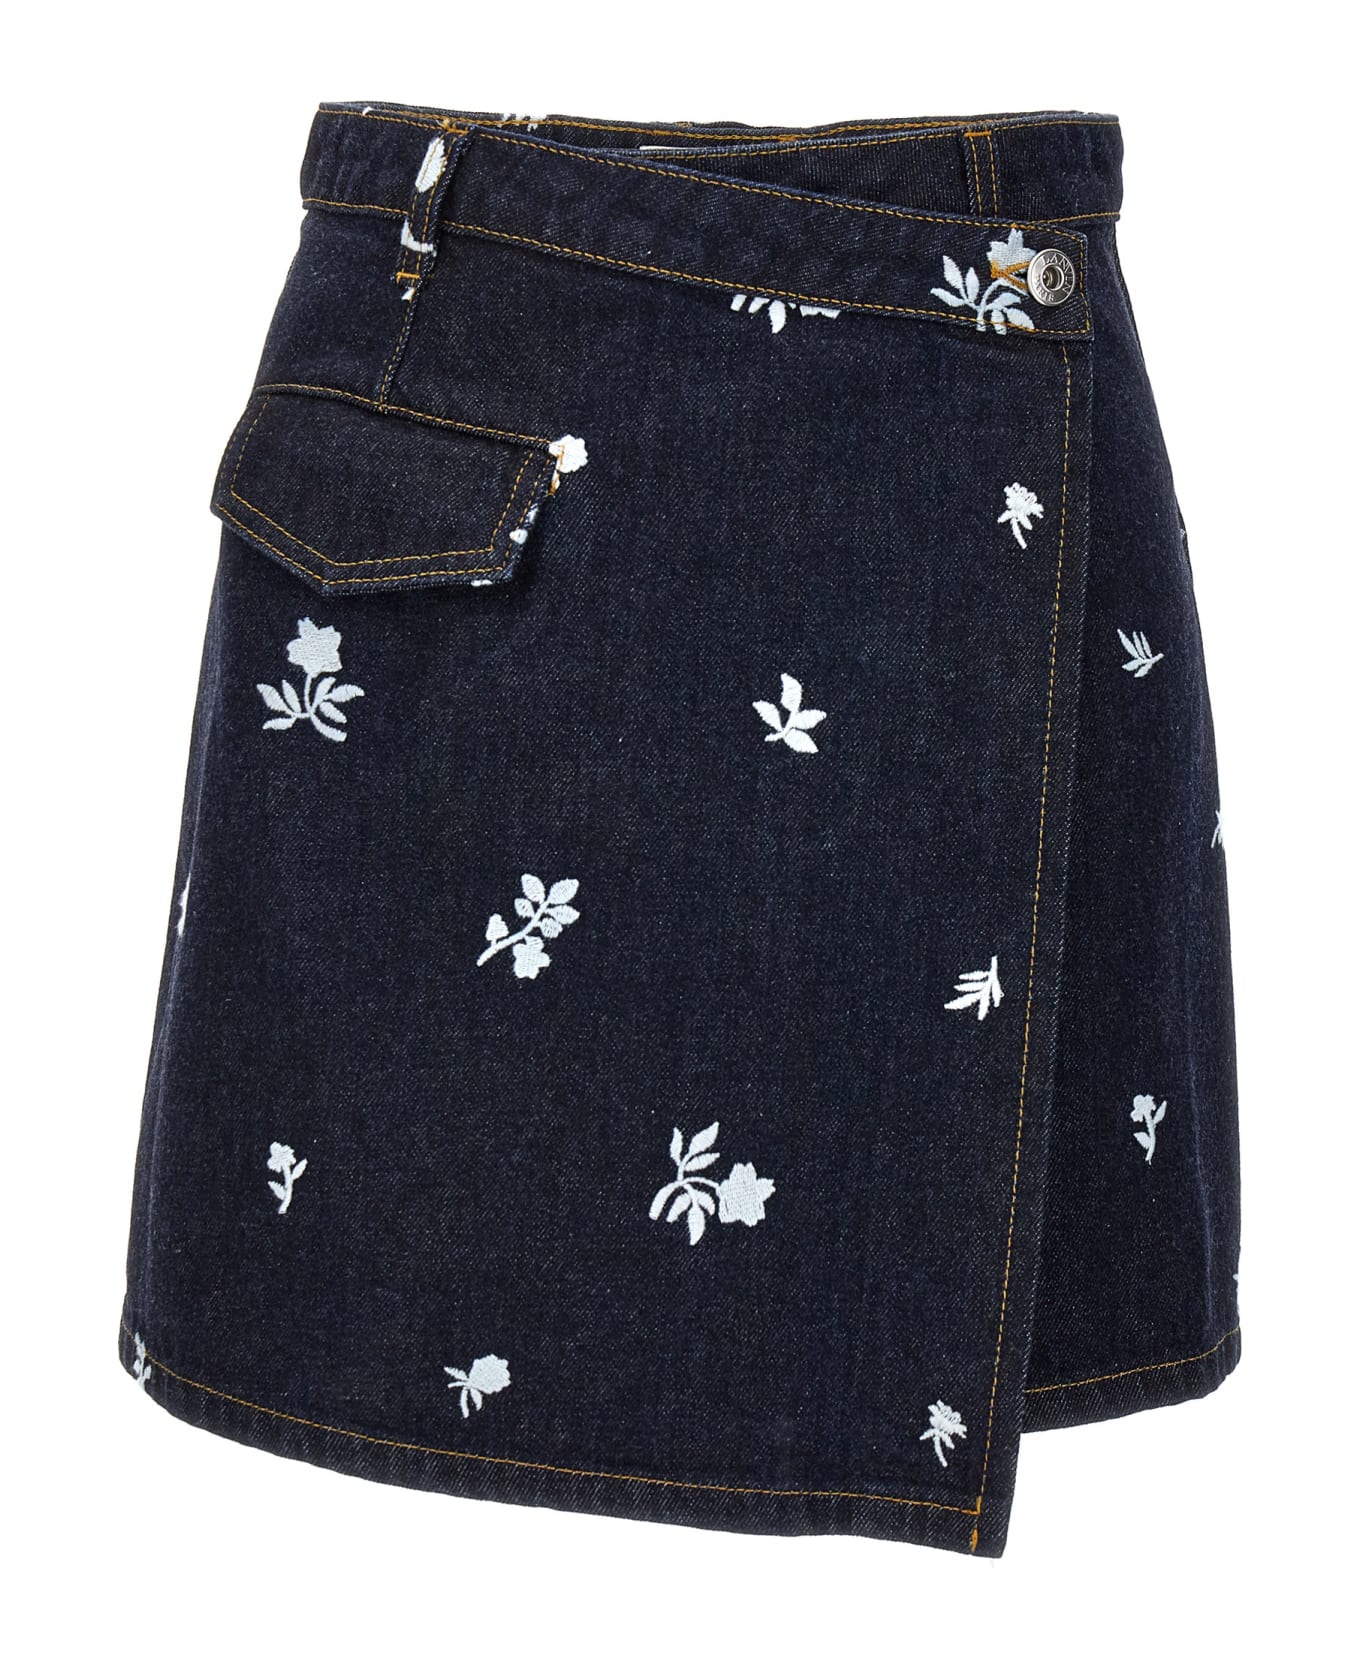 Lanvin All-over Embroidery Skirt - Blue スカート